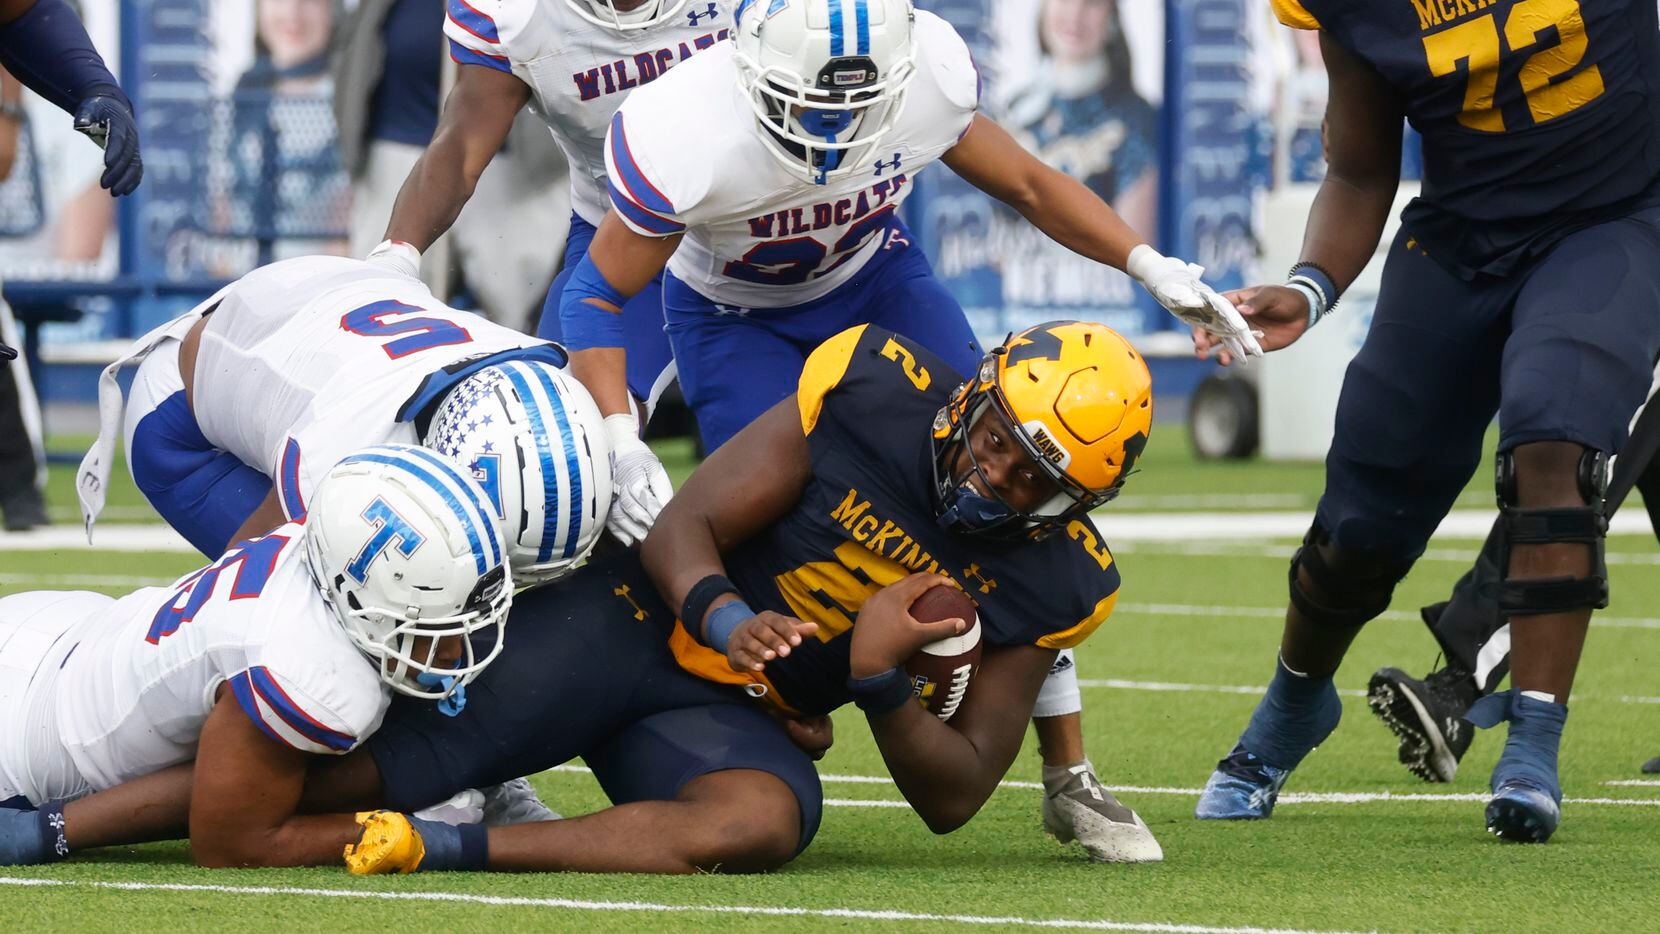 McKinney High’s Bryan Jackson (2) gets tackled during a season-opening football game against...